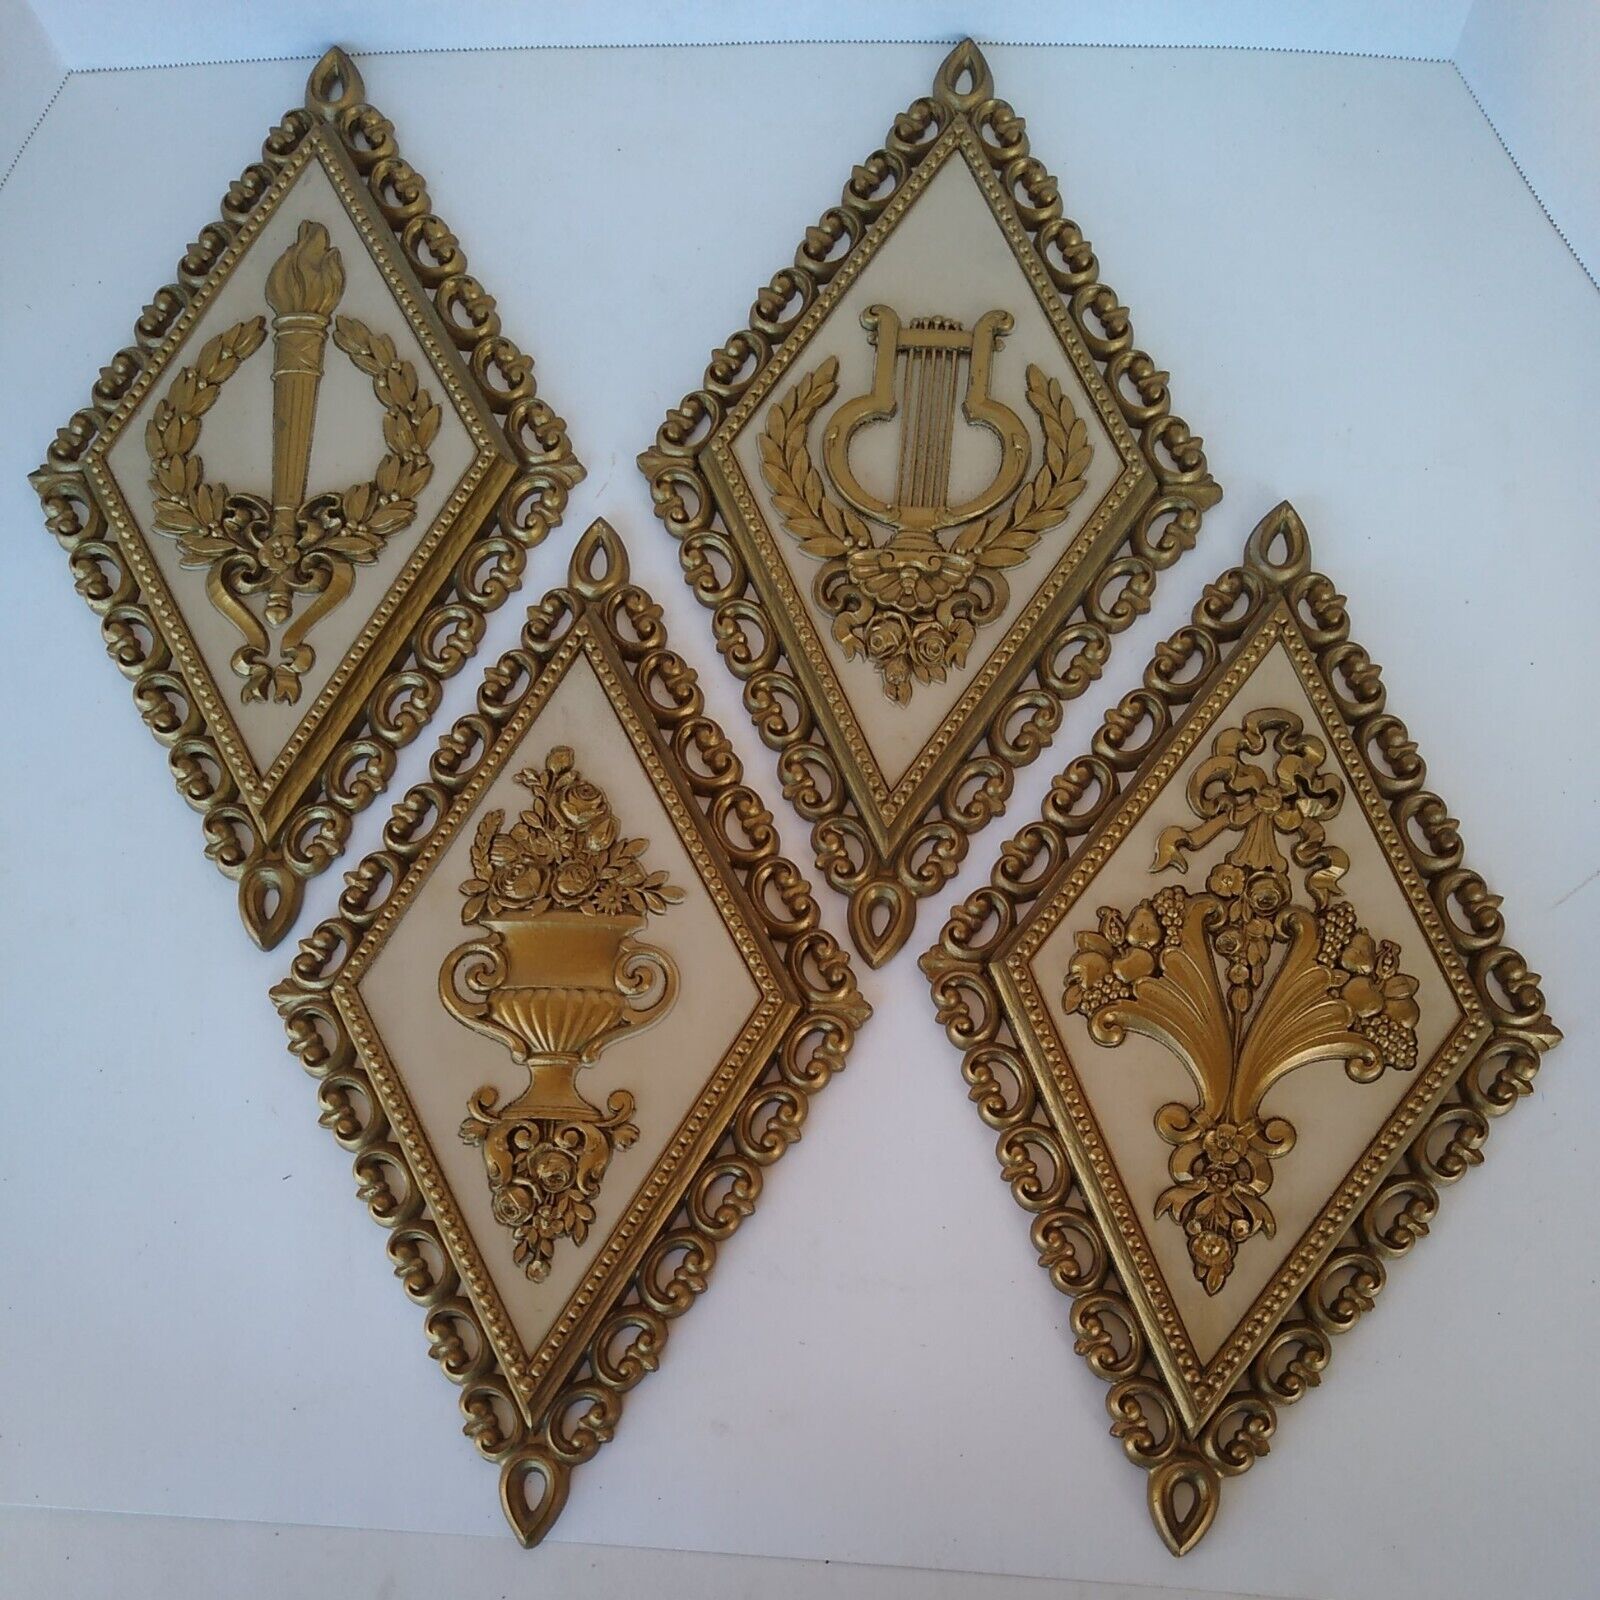 4 Vintage Wall Hanging Plaques Gold Diamond - 1971 - HOMCO 7224 7225 7226 7227